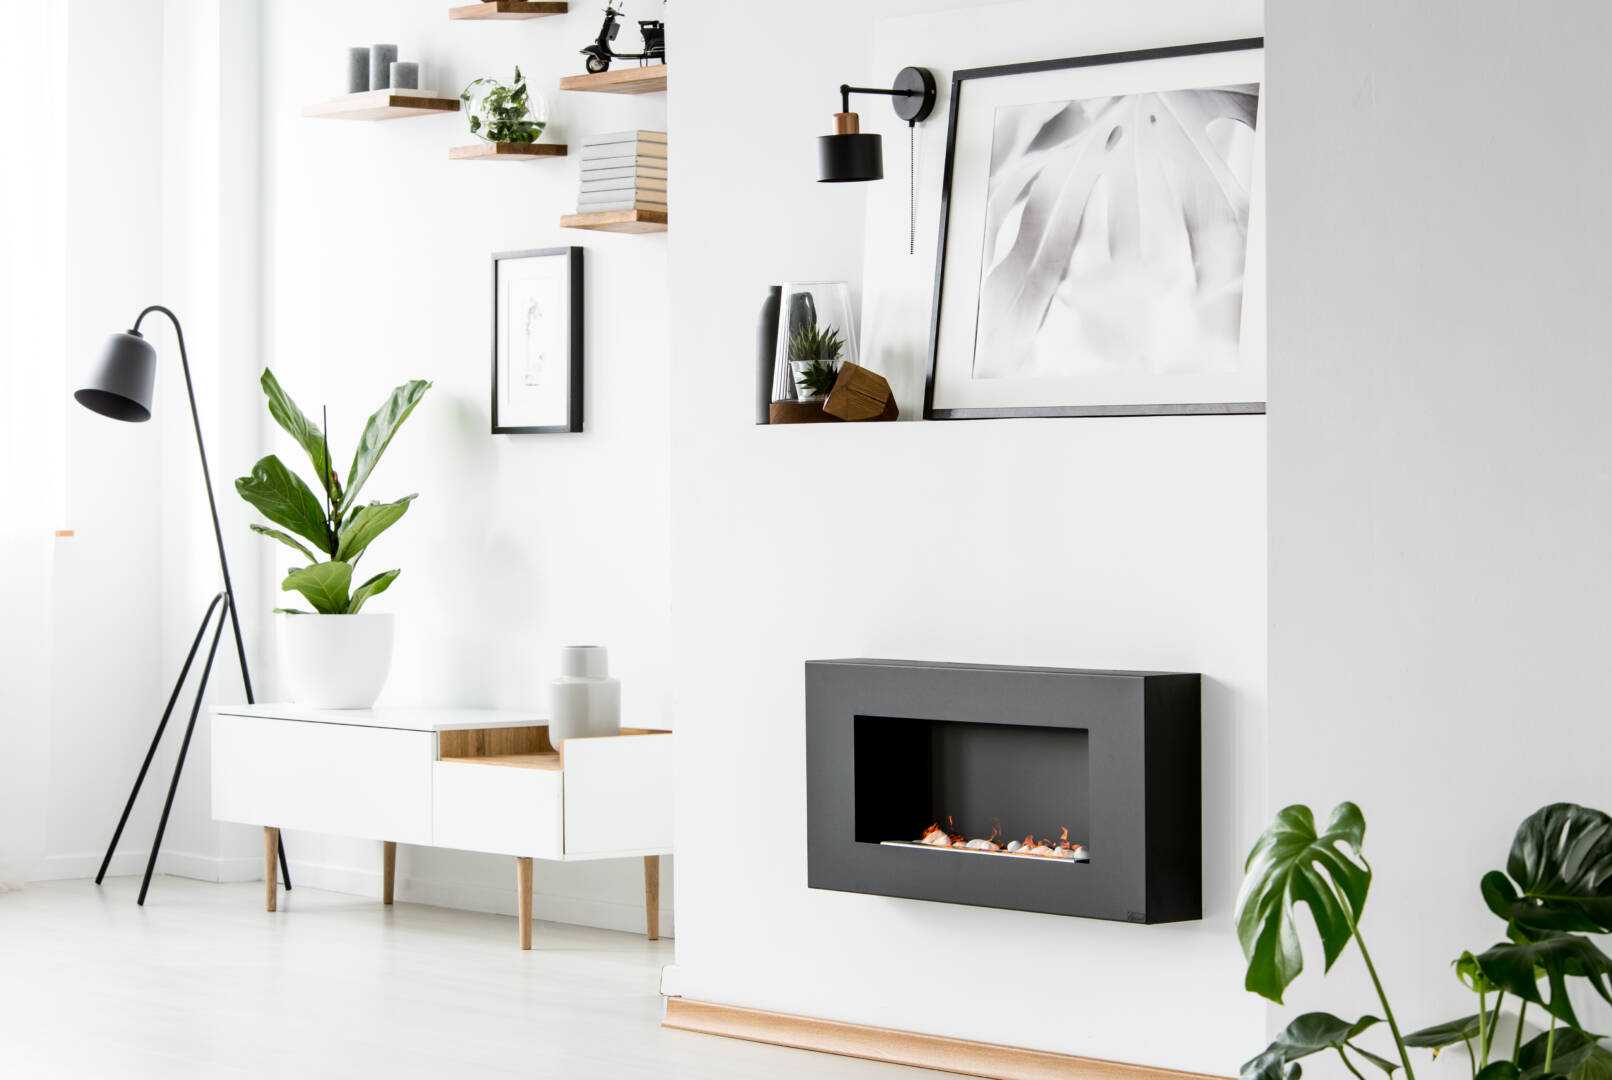 poster-above-black-fireplace-in-white-apartment-in-2021-08-26-15-45-38